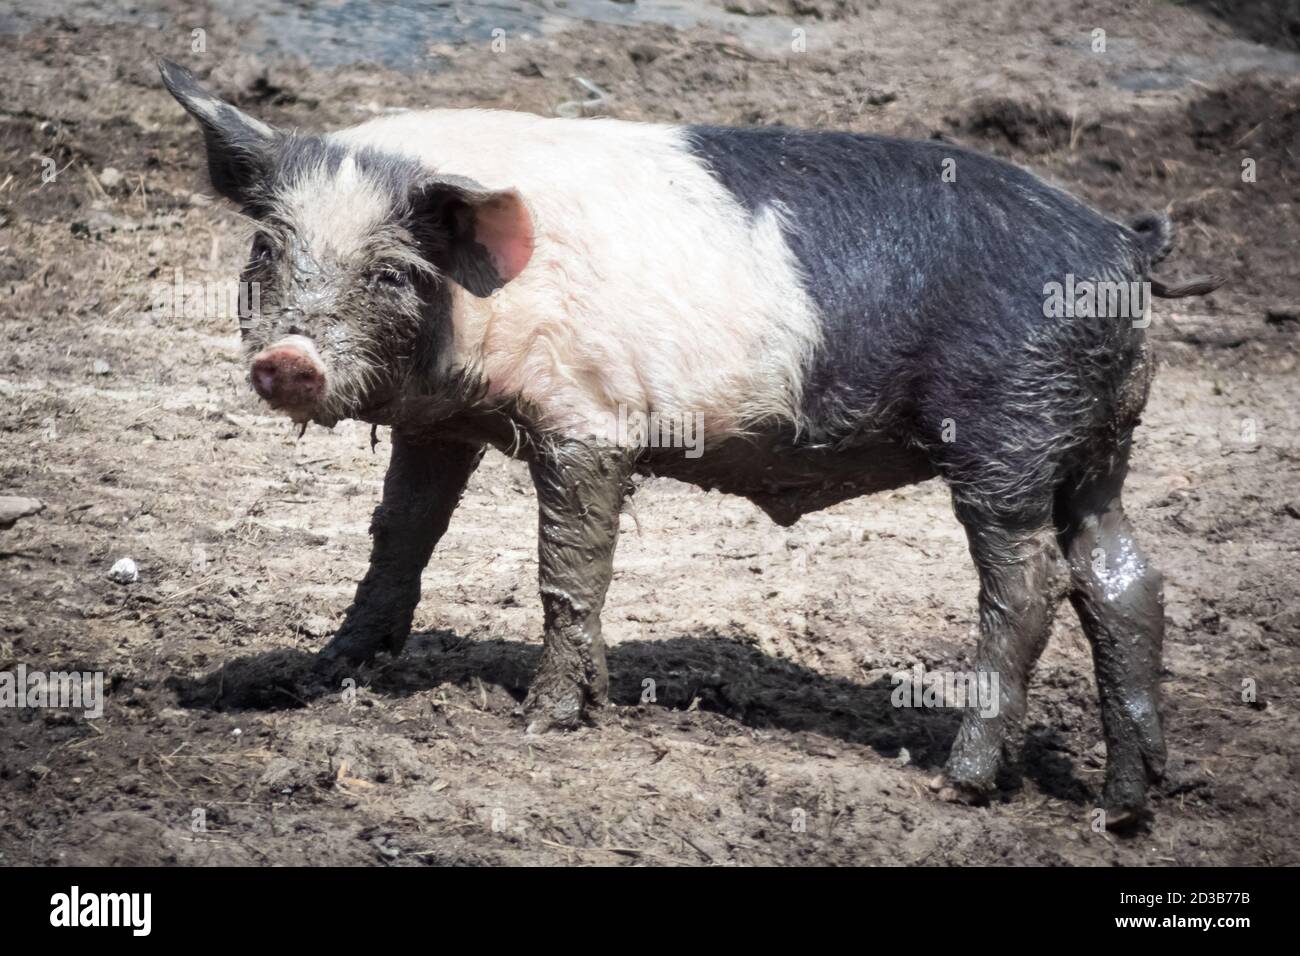 Baby piglet playing in the mud. Domestic animal in natural scene. Domestic pig, natural growth in normal conditions. Stock Photo